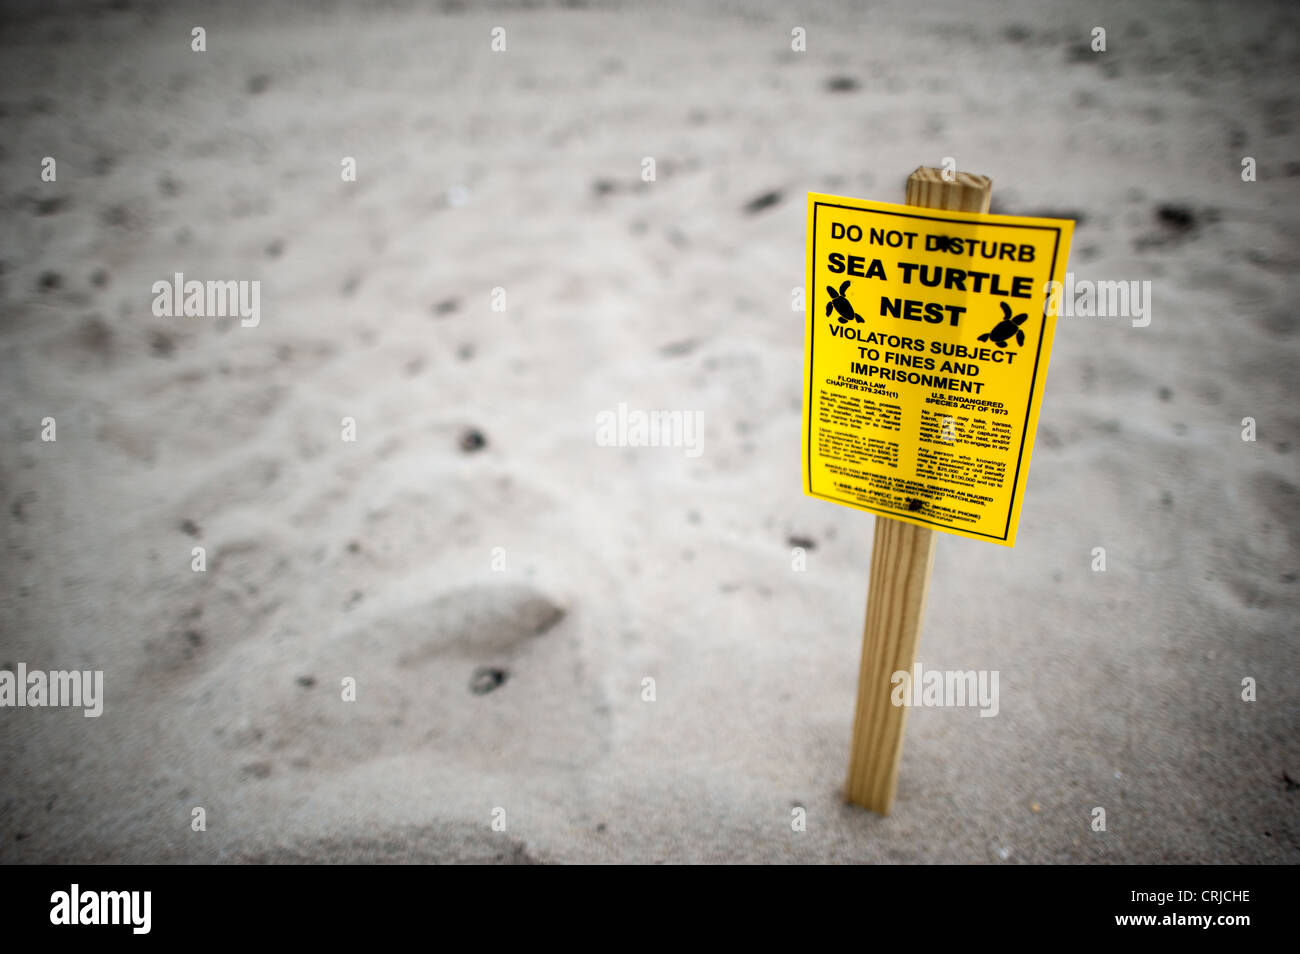 Turtle nesting warning signs in the sand at the beach at Delray Beach on Florida's eastern coastline. Violators who disturb the nest are subject to fines and imprisonment. Stock Photo